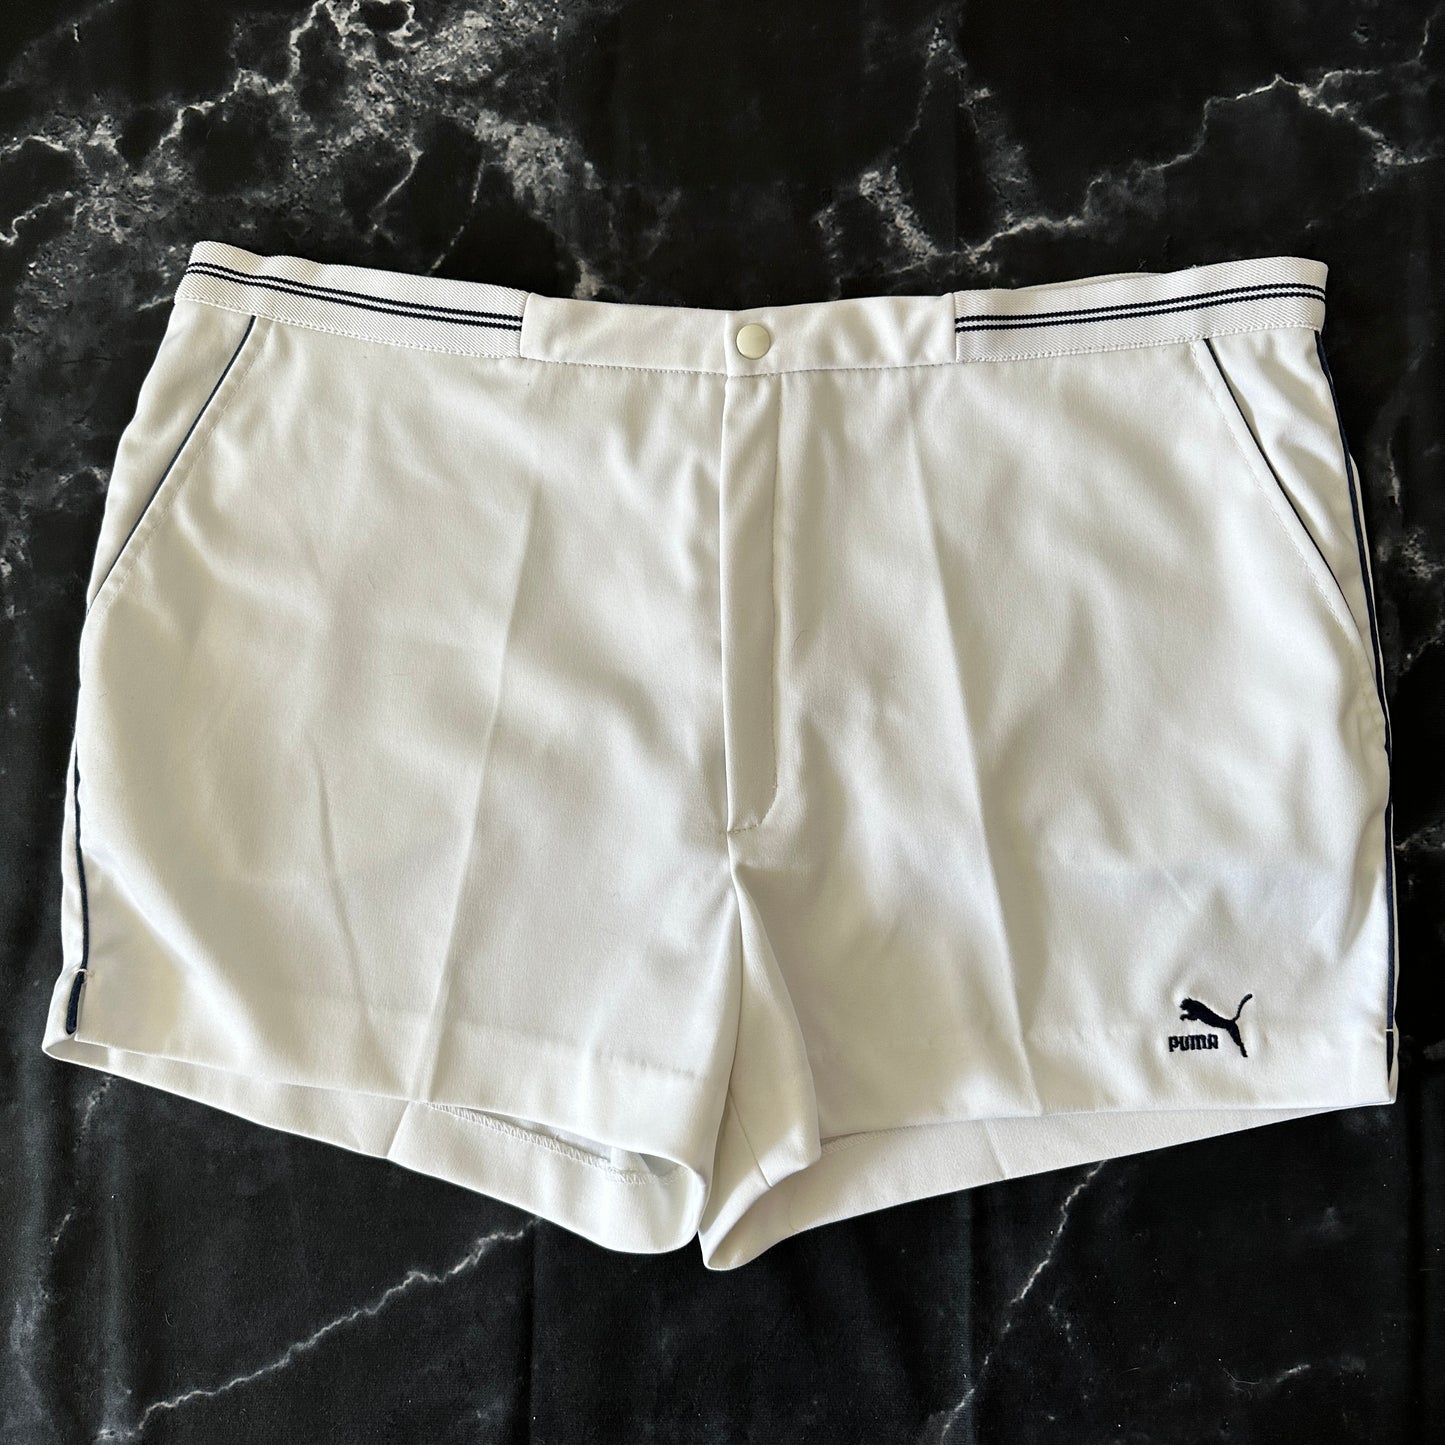 Puma Vintage 80s Tennis Shorts - White - 54 / XL - Made in IItaly